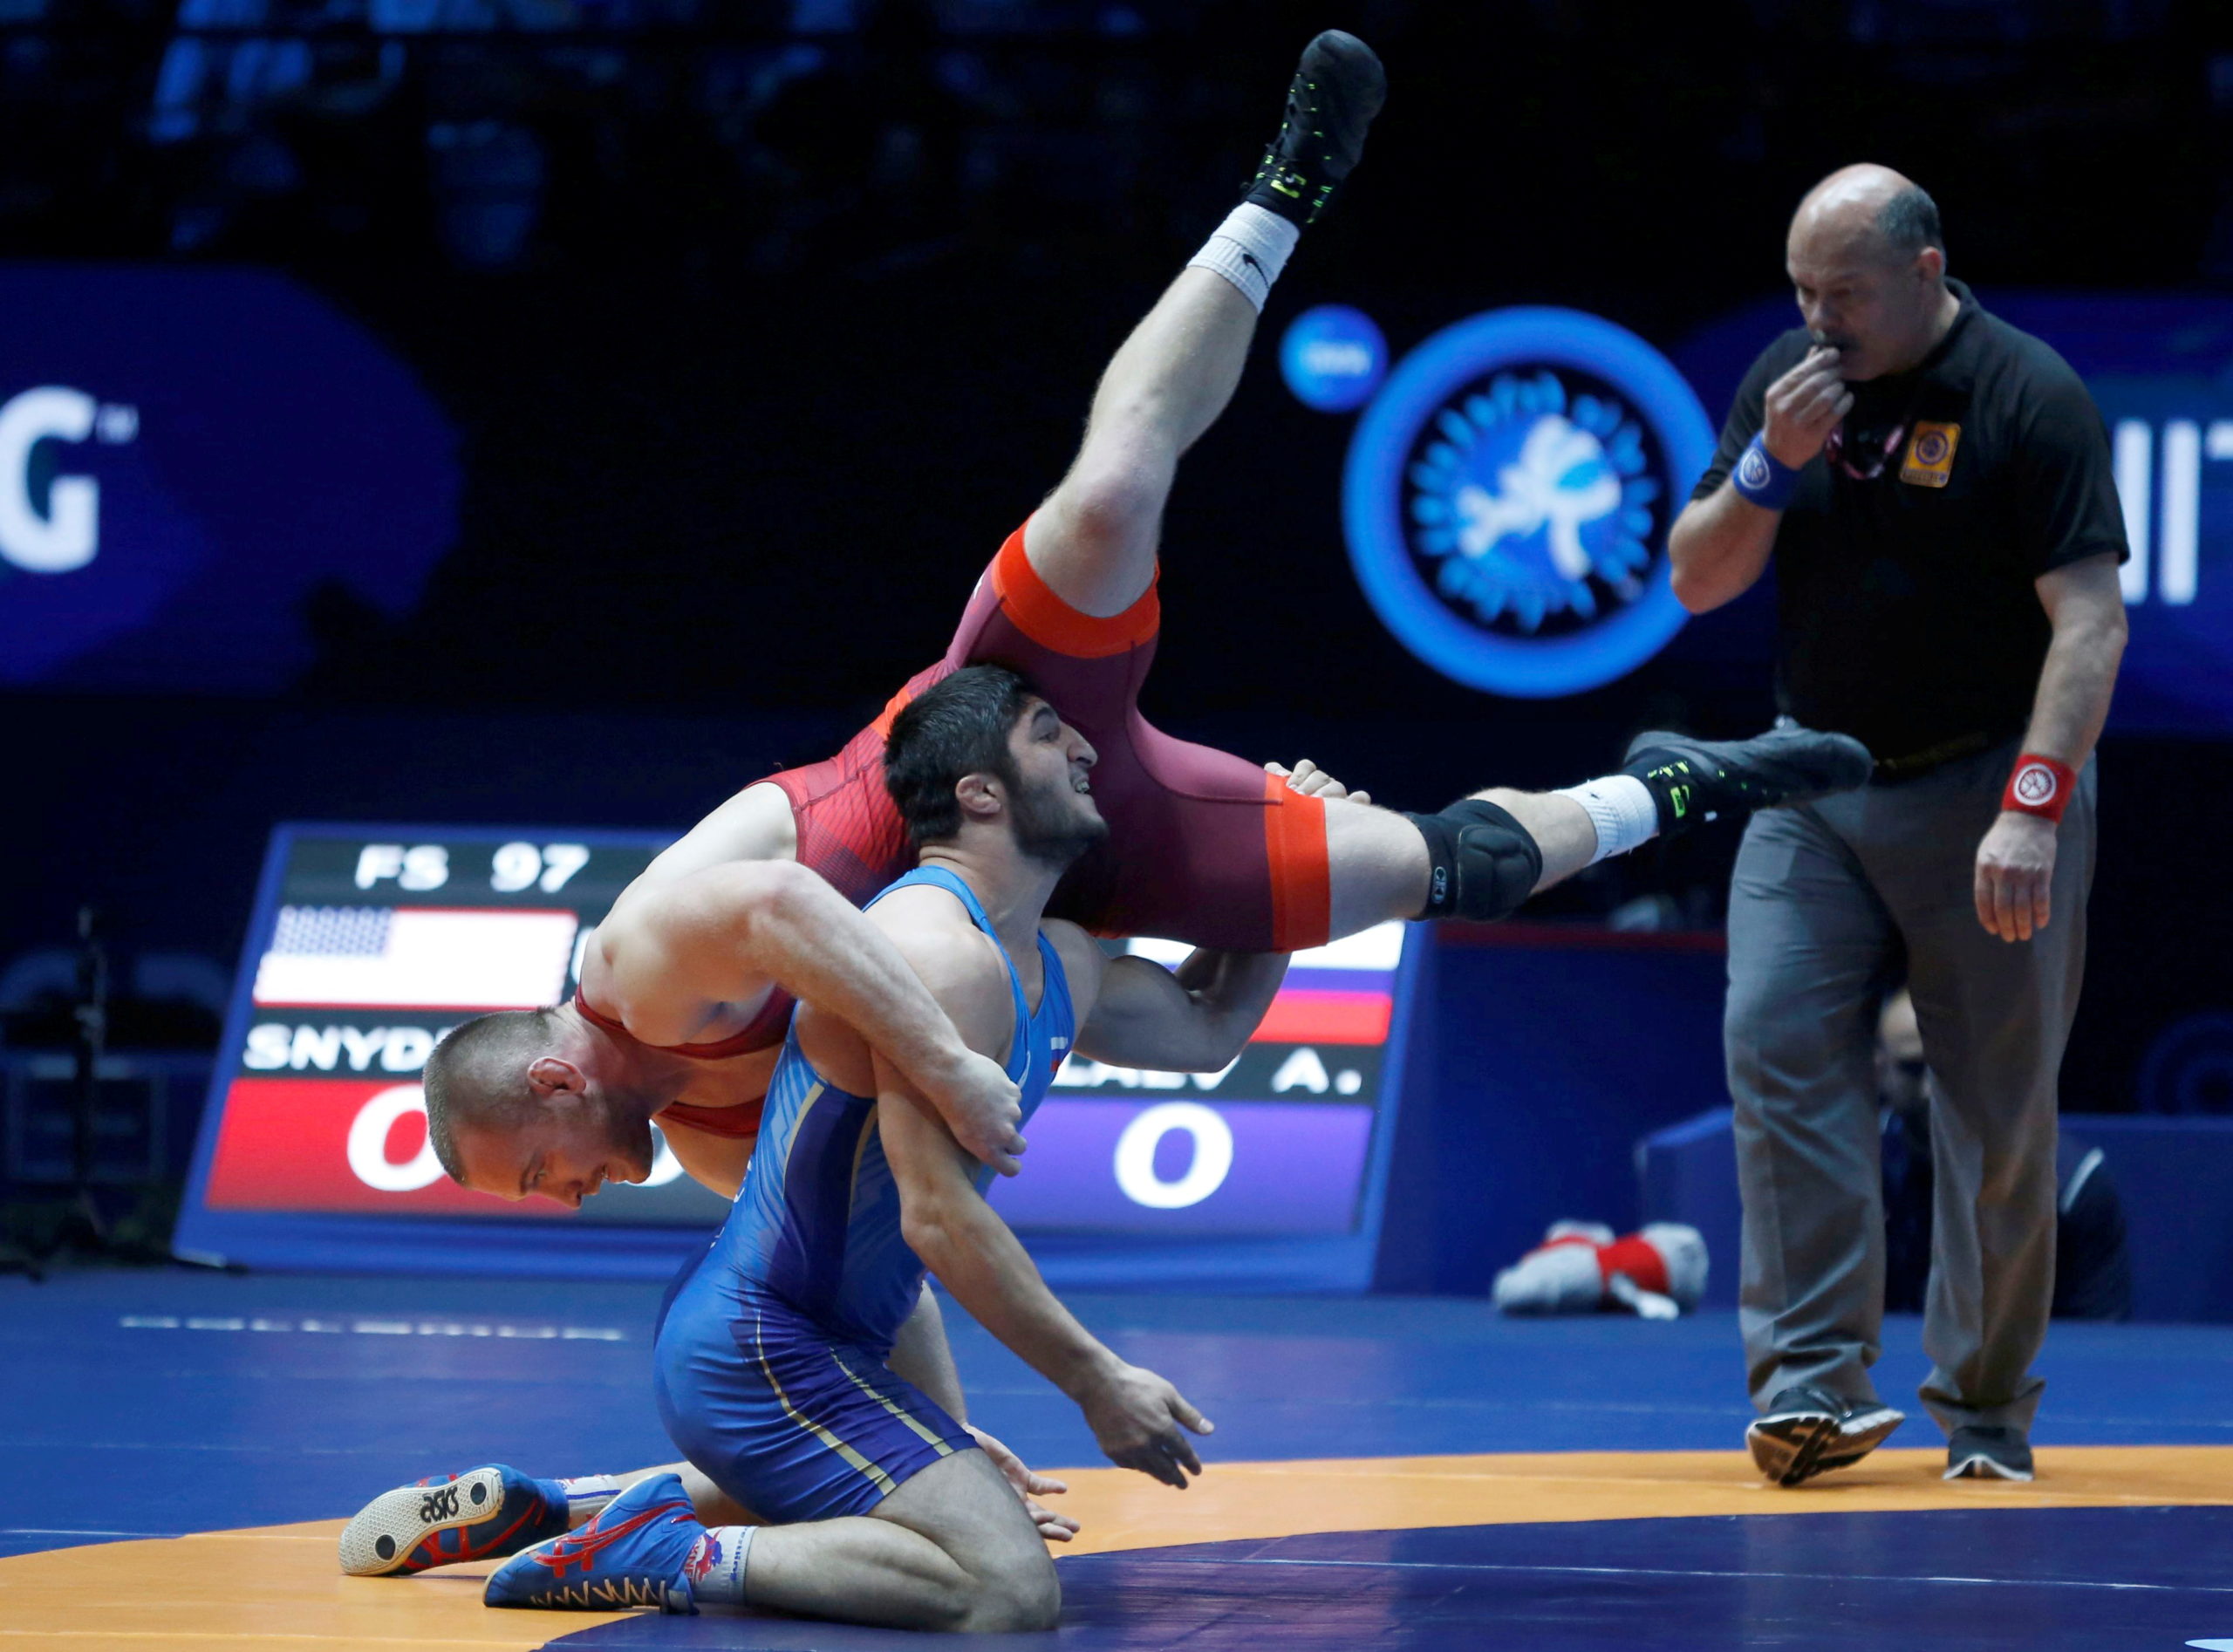  World Wrestling Championships - Men's Freestyle 97 kg Final - AccorHotels Arena, Paris, France - August 26, 2017 - Kyle Frederick Snyder of the U.S. competes with Abdulrashid Sadulaev of Russia